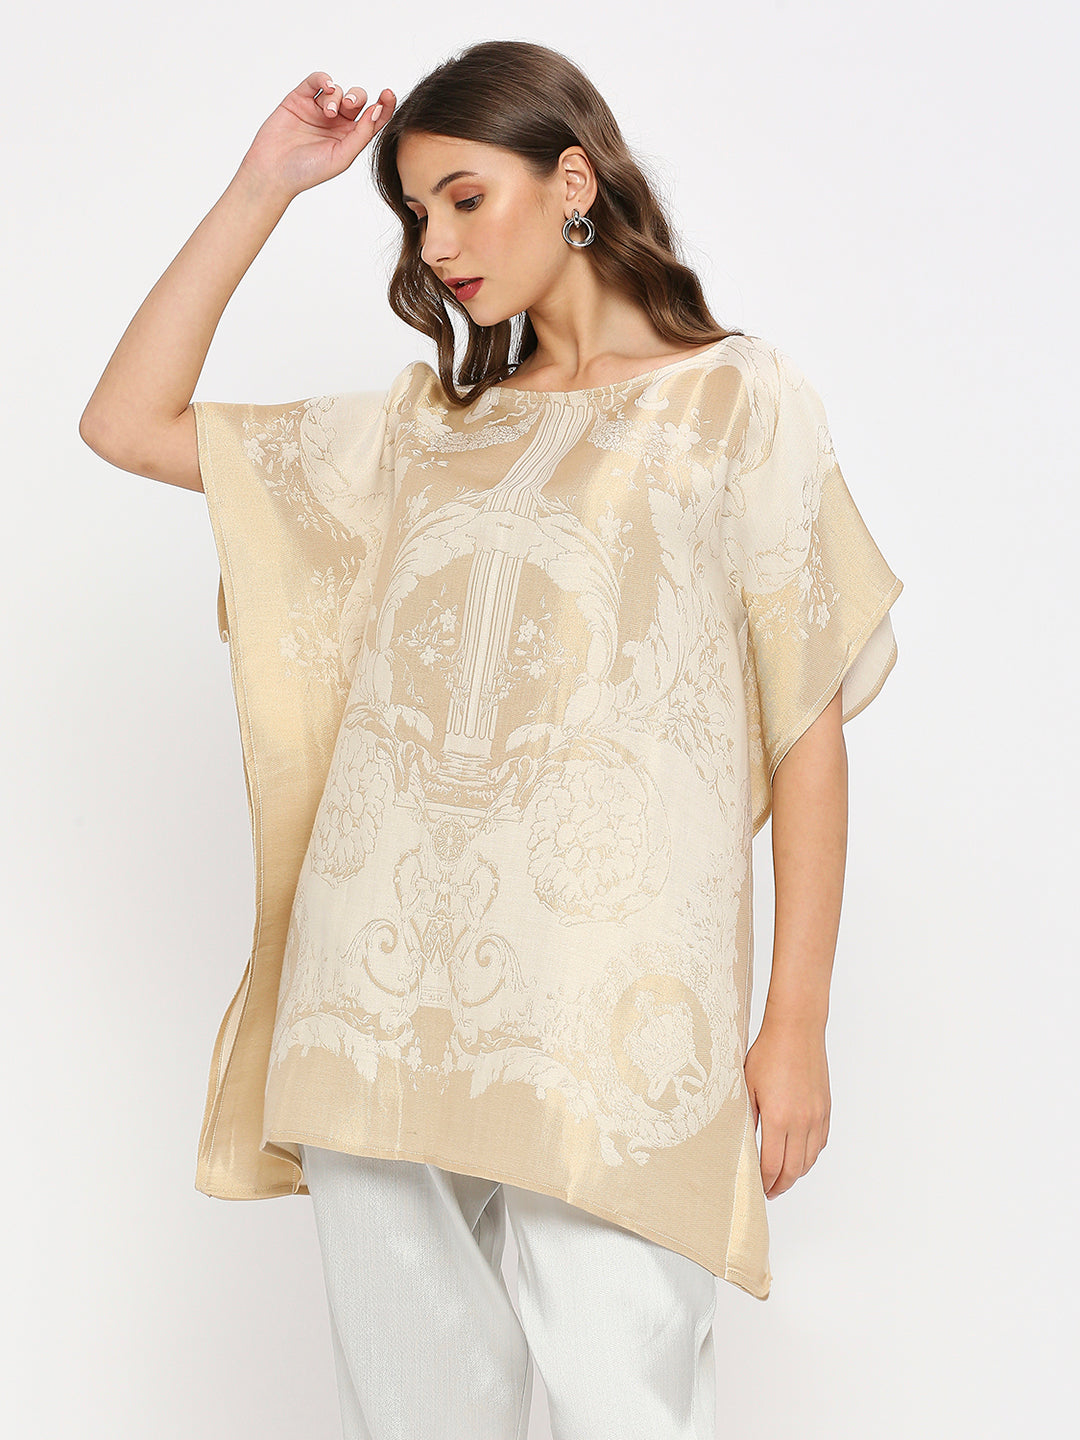 Brocade French Patterned Design Off-White Poncho